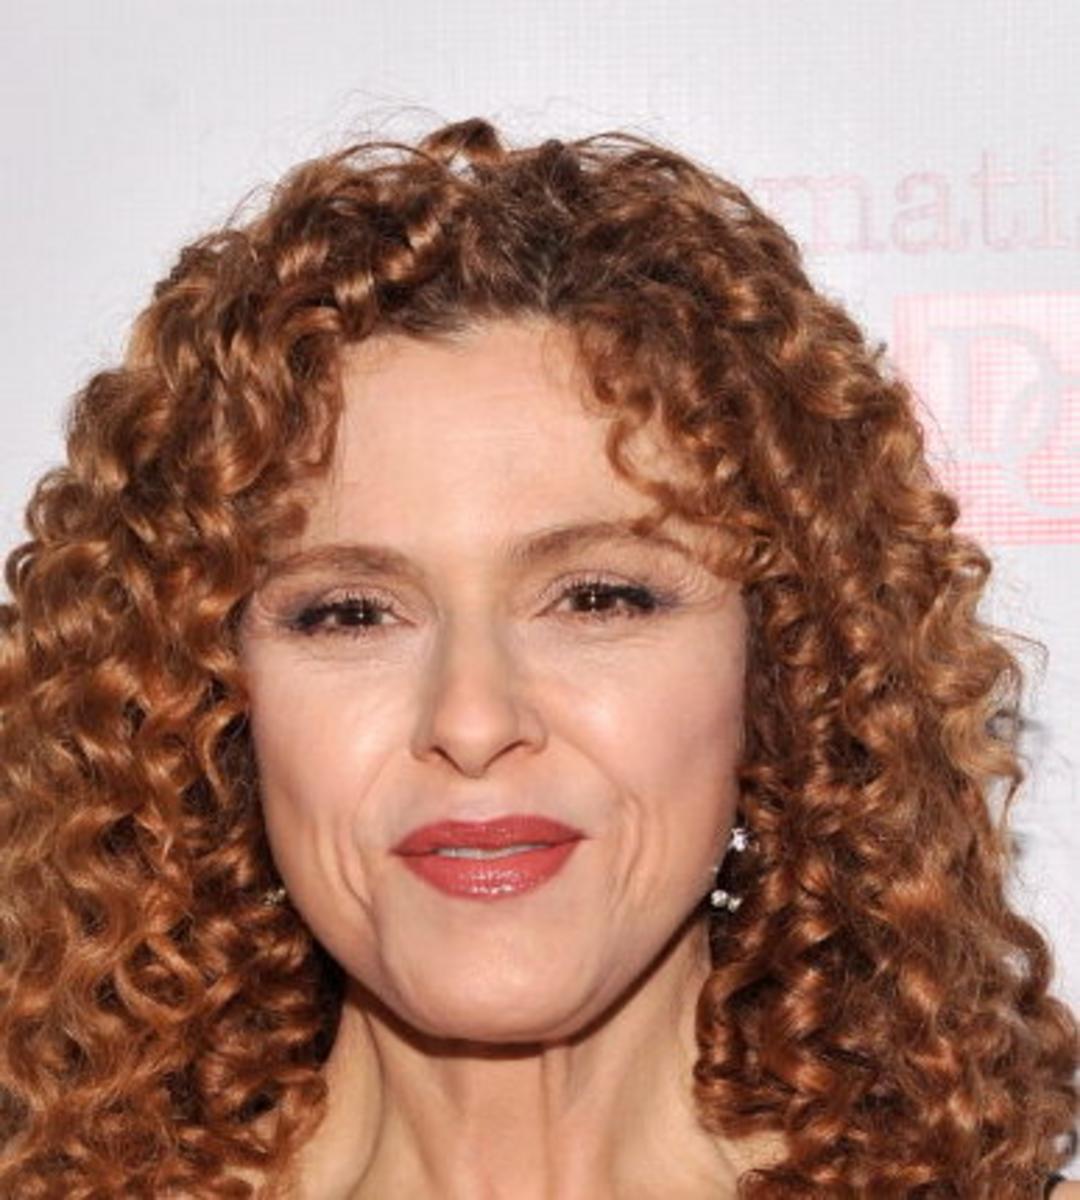 Bernadette picture peters of 30 Glamorous